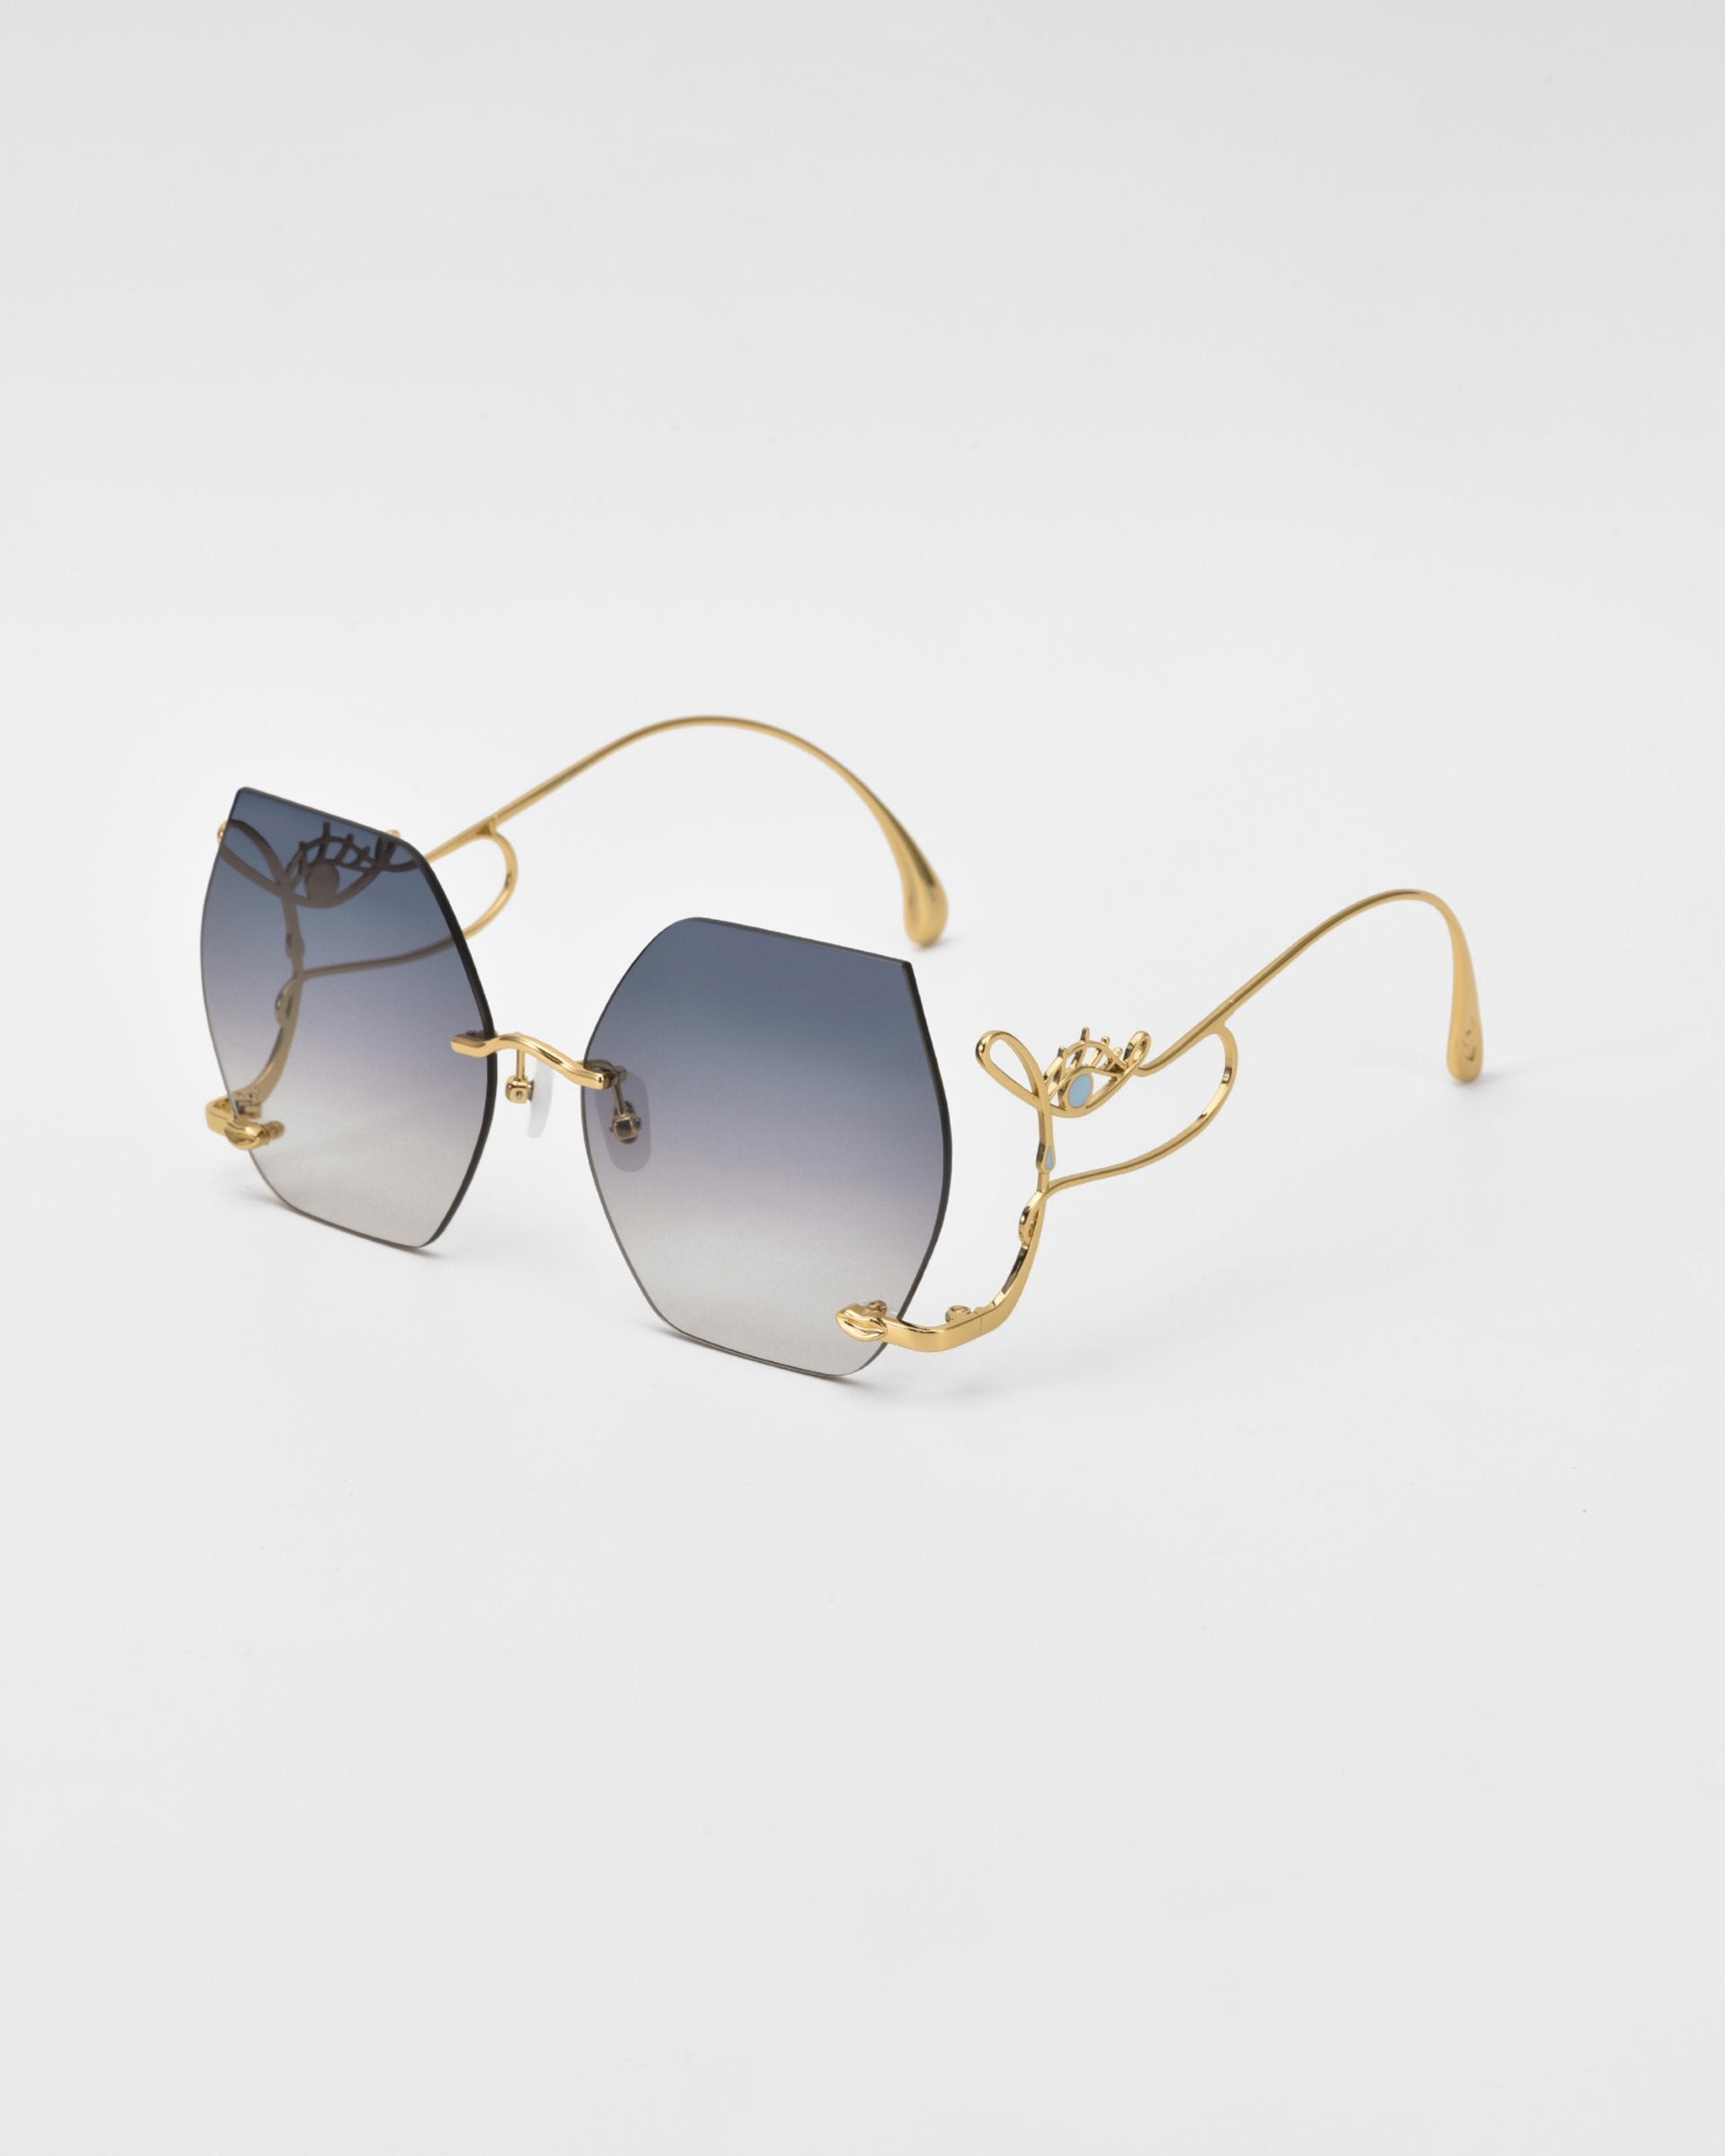 Introducing the For Art&#39;s Sake® Cry Me a River sunglasses: a pair of limited edition, stylish sunglasses featuring hexagonal gradient lenses transitioning from dark to light. The frame is gold with delicate, ornate detailing on the arms and bridge. The tips of the arms are elegantly curved, lending a sophisticated look.